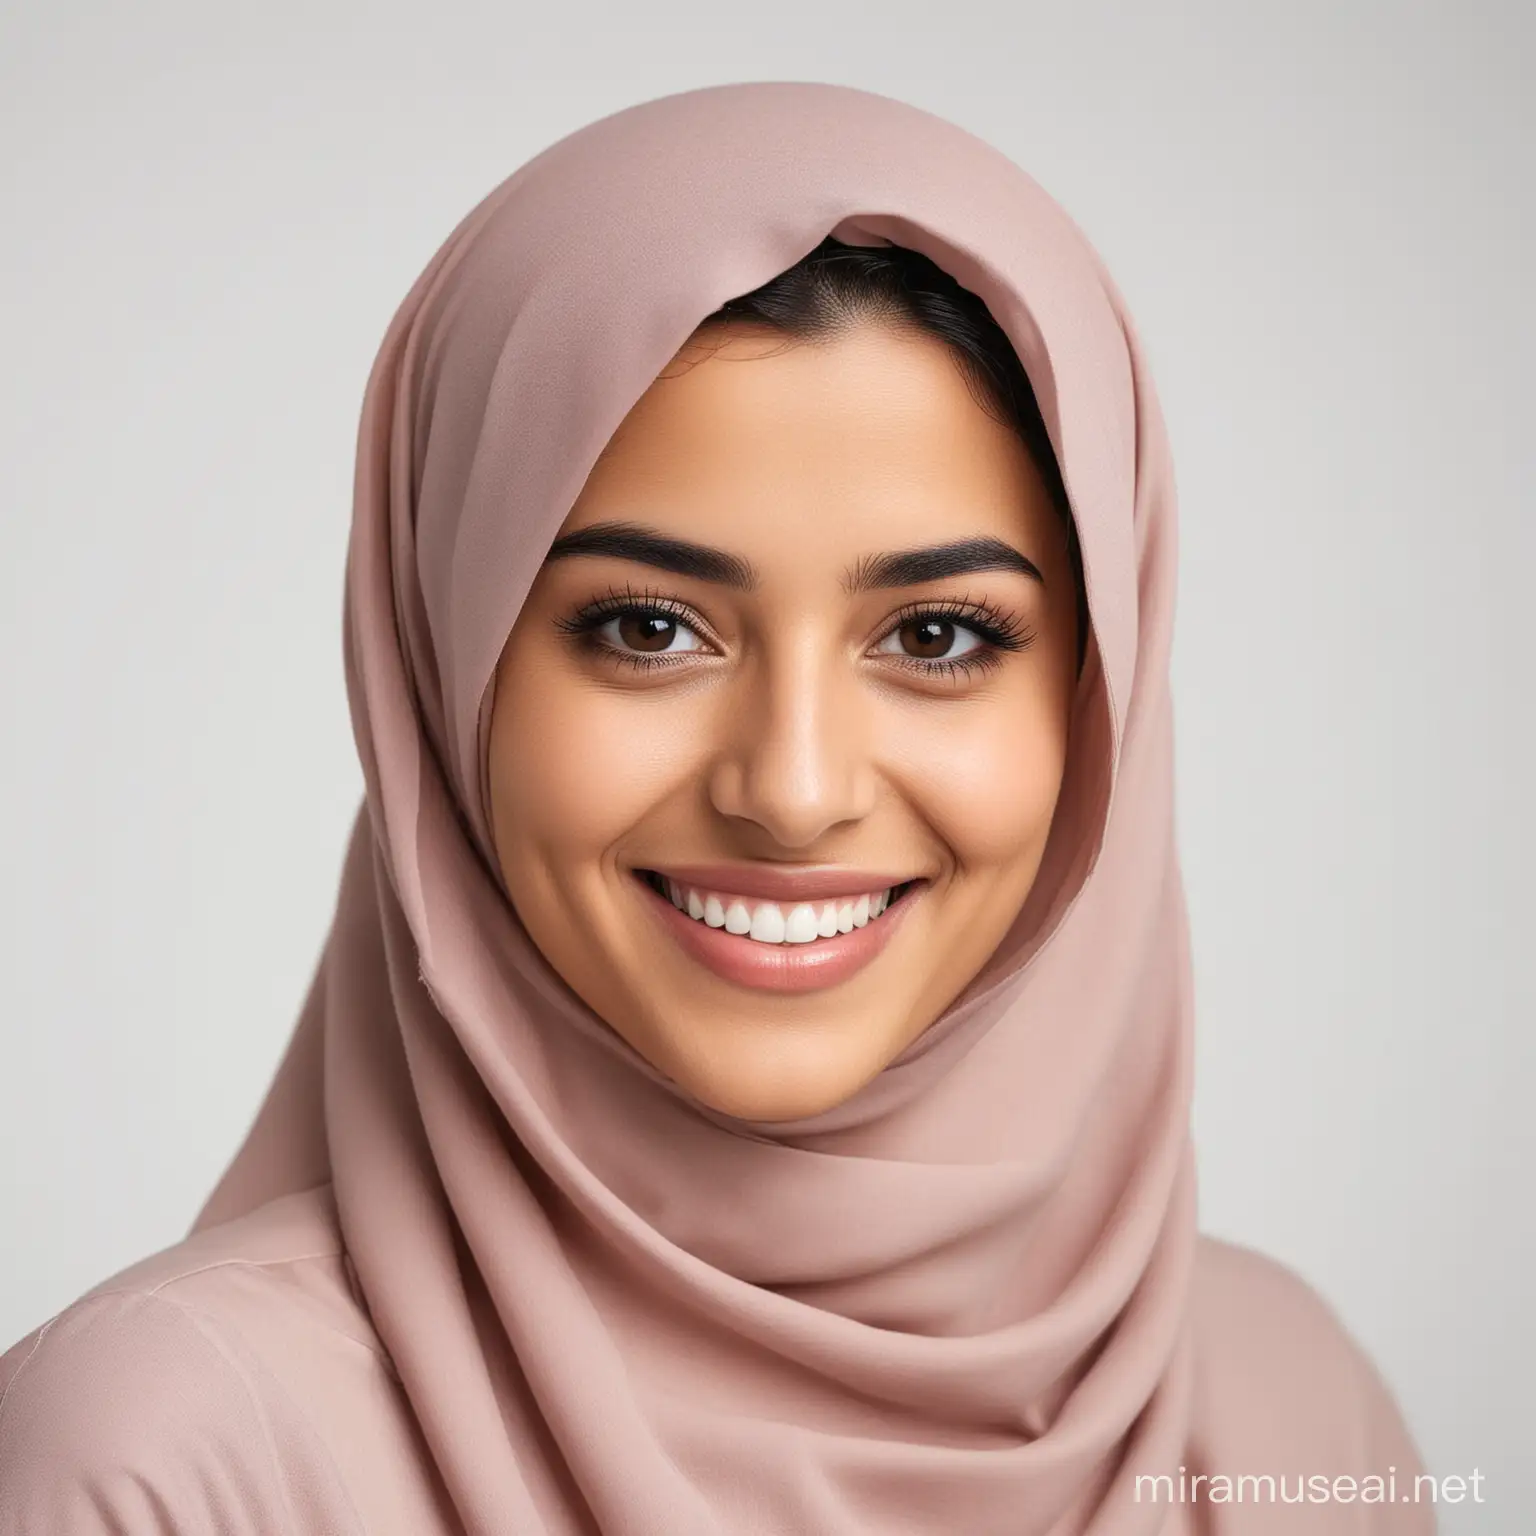 Young Saudi Woman Smiling Against White Background